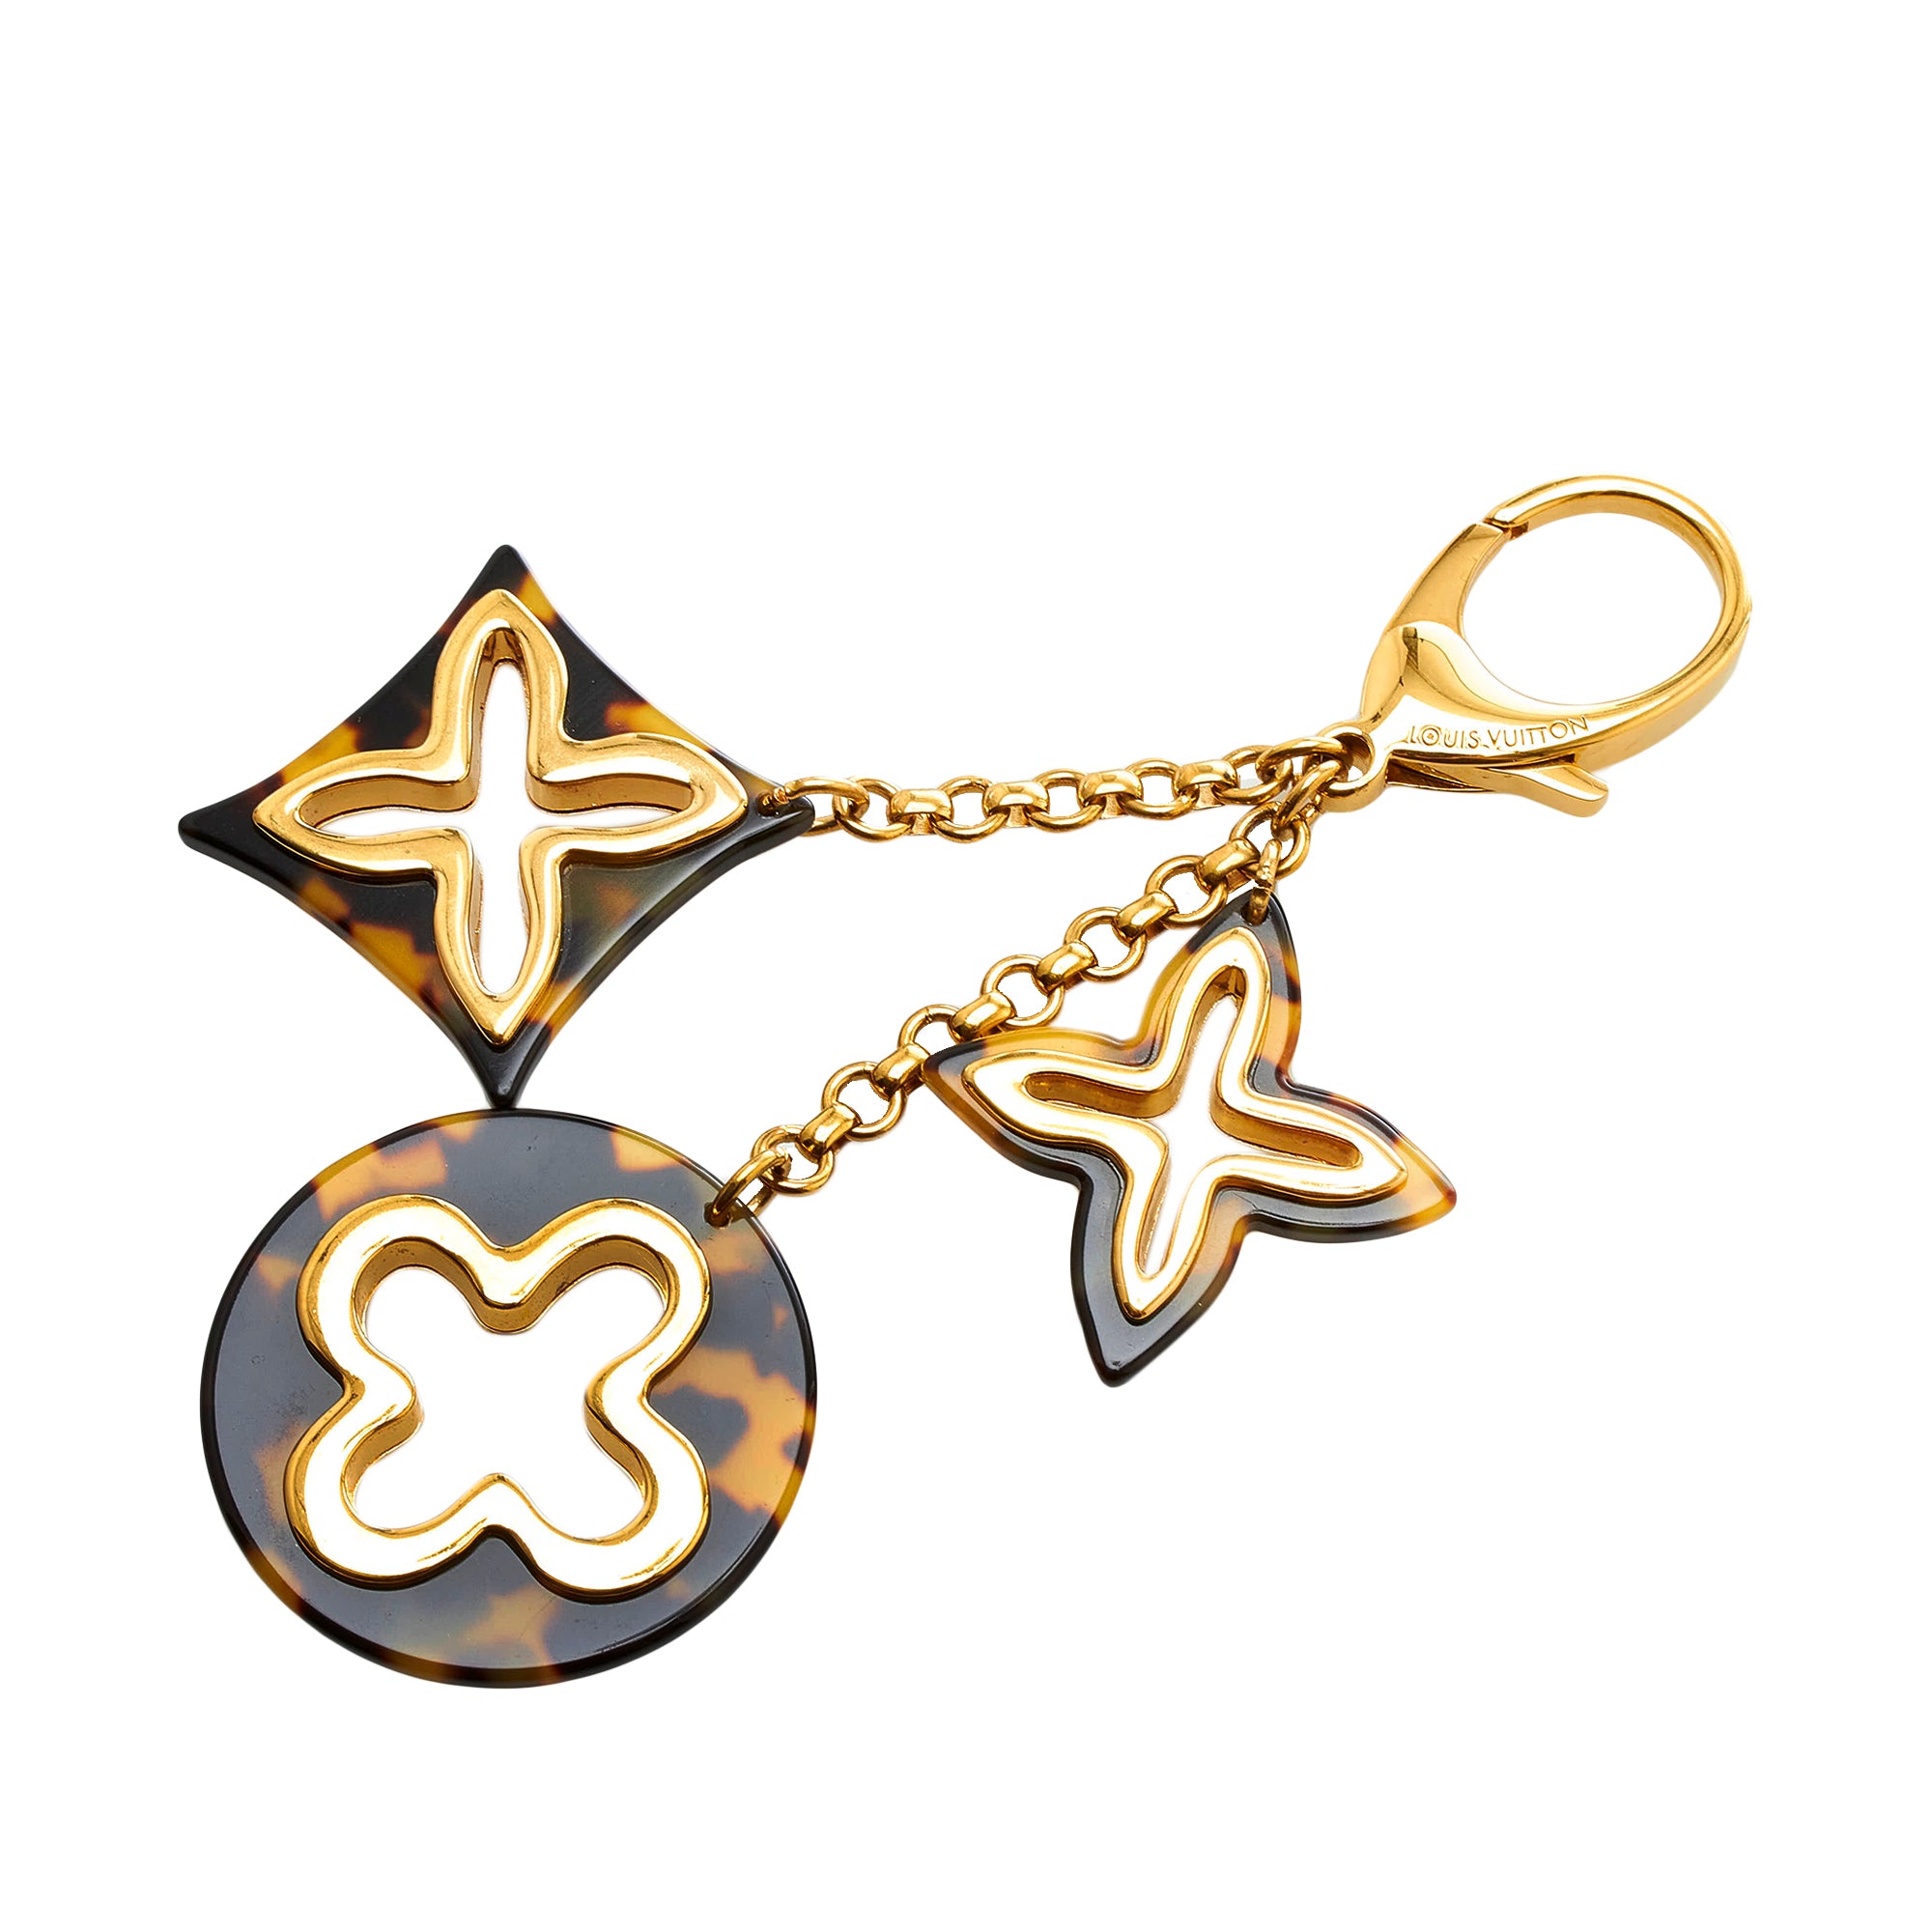 LOUIS VUITTON Insolence Key Holder and Bag Charm-US